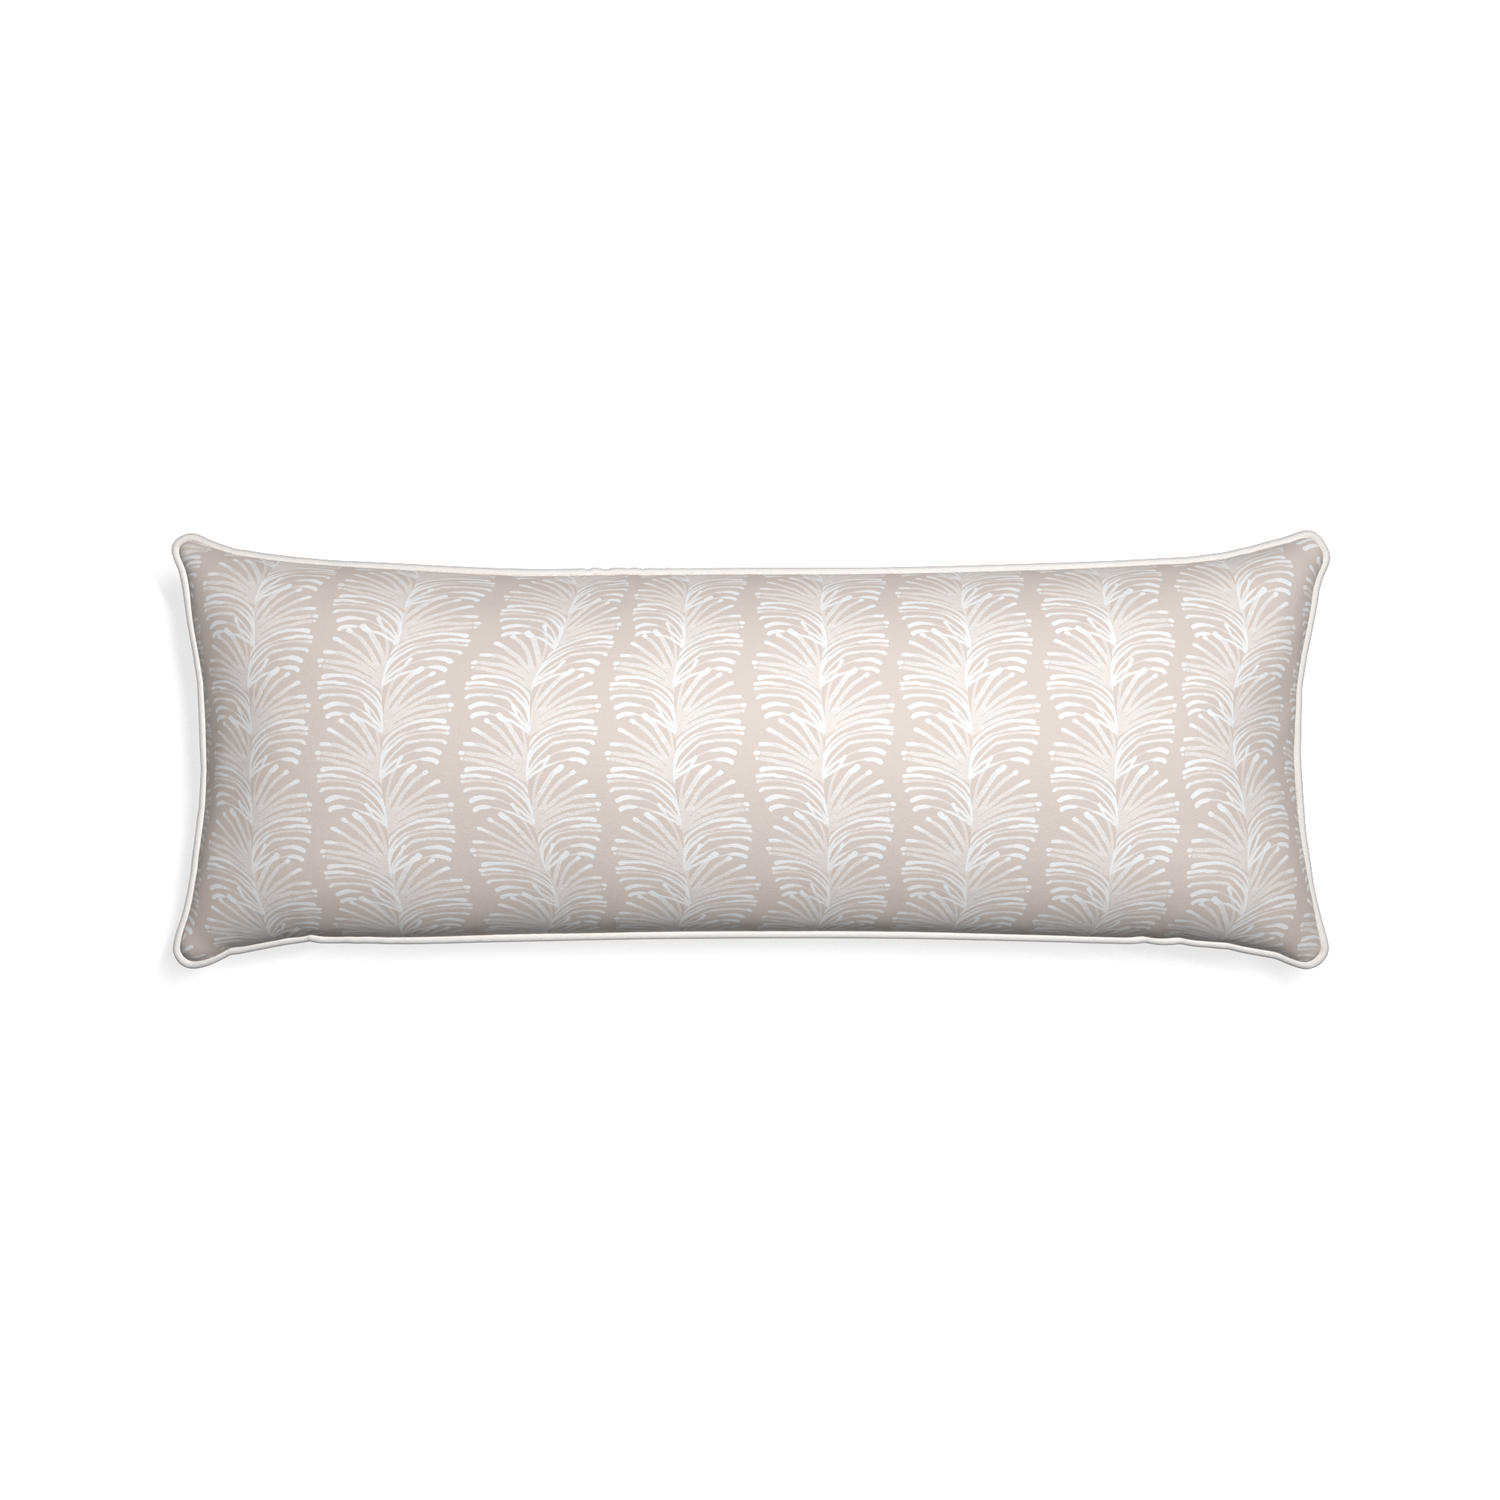 Xl-lumbar emma sand custom sand colored botanical stripepillow with snow piping on white background